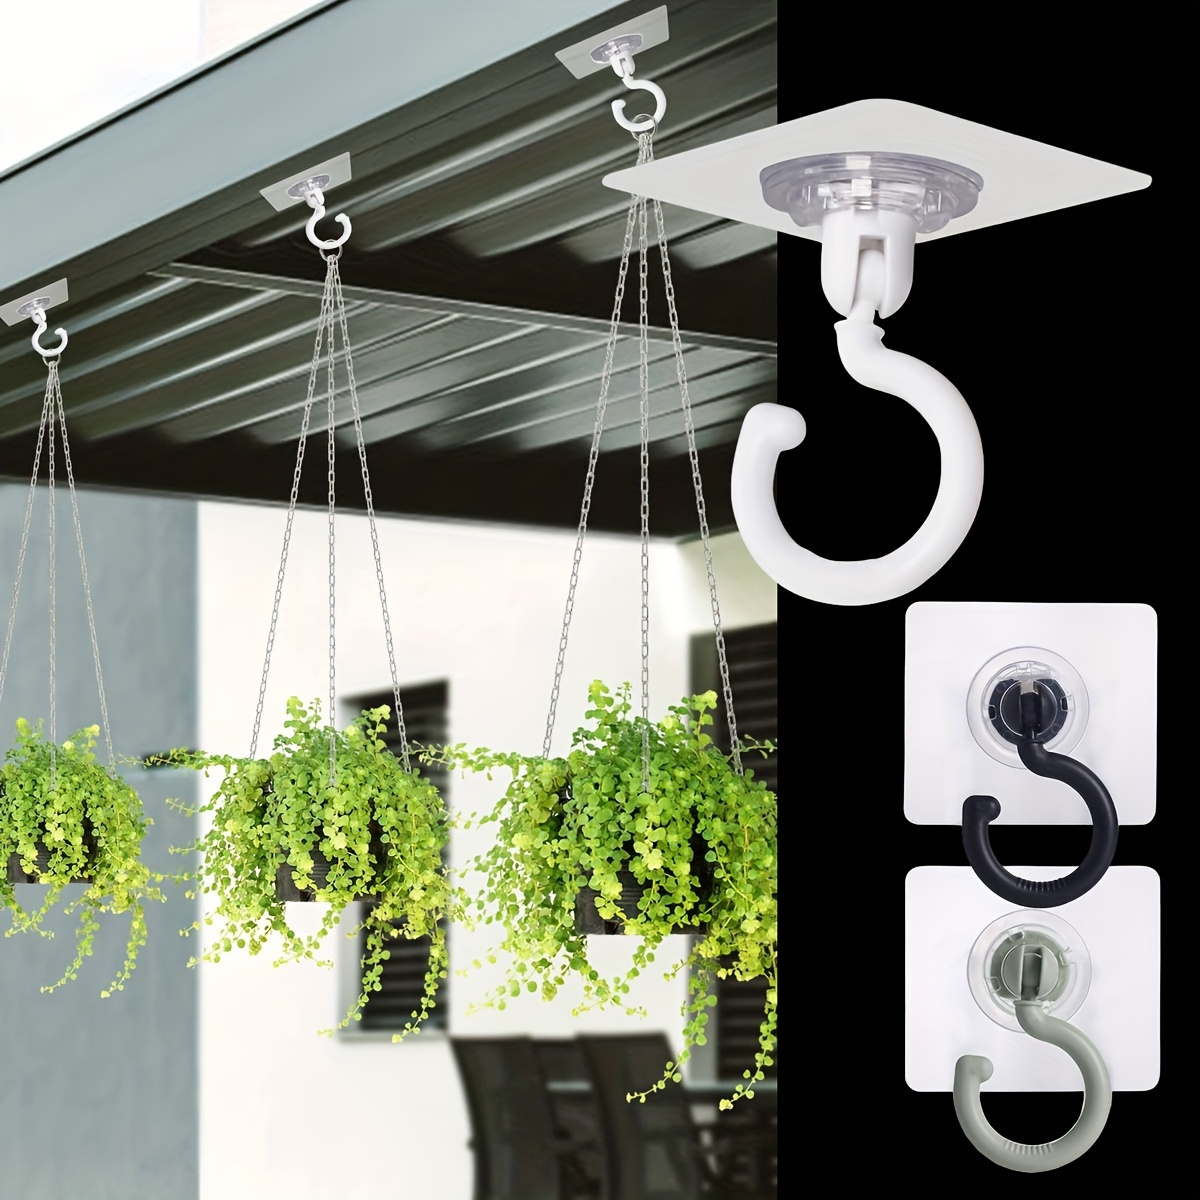 

5pcs Plastic Adhesive Ceiling Hooks, Rotatable 360°, No-drill Easy Hanging For Plants, Lanterns & Wind Chimes